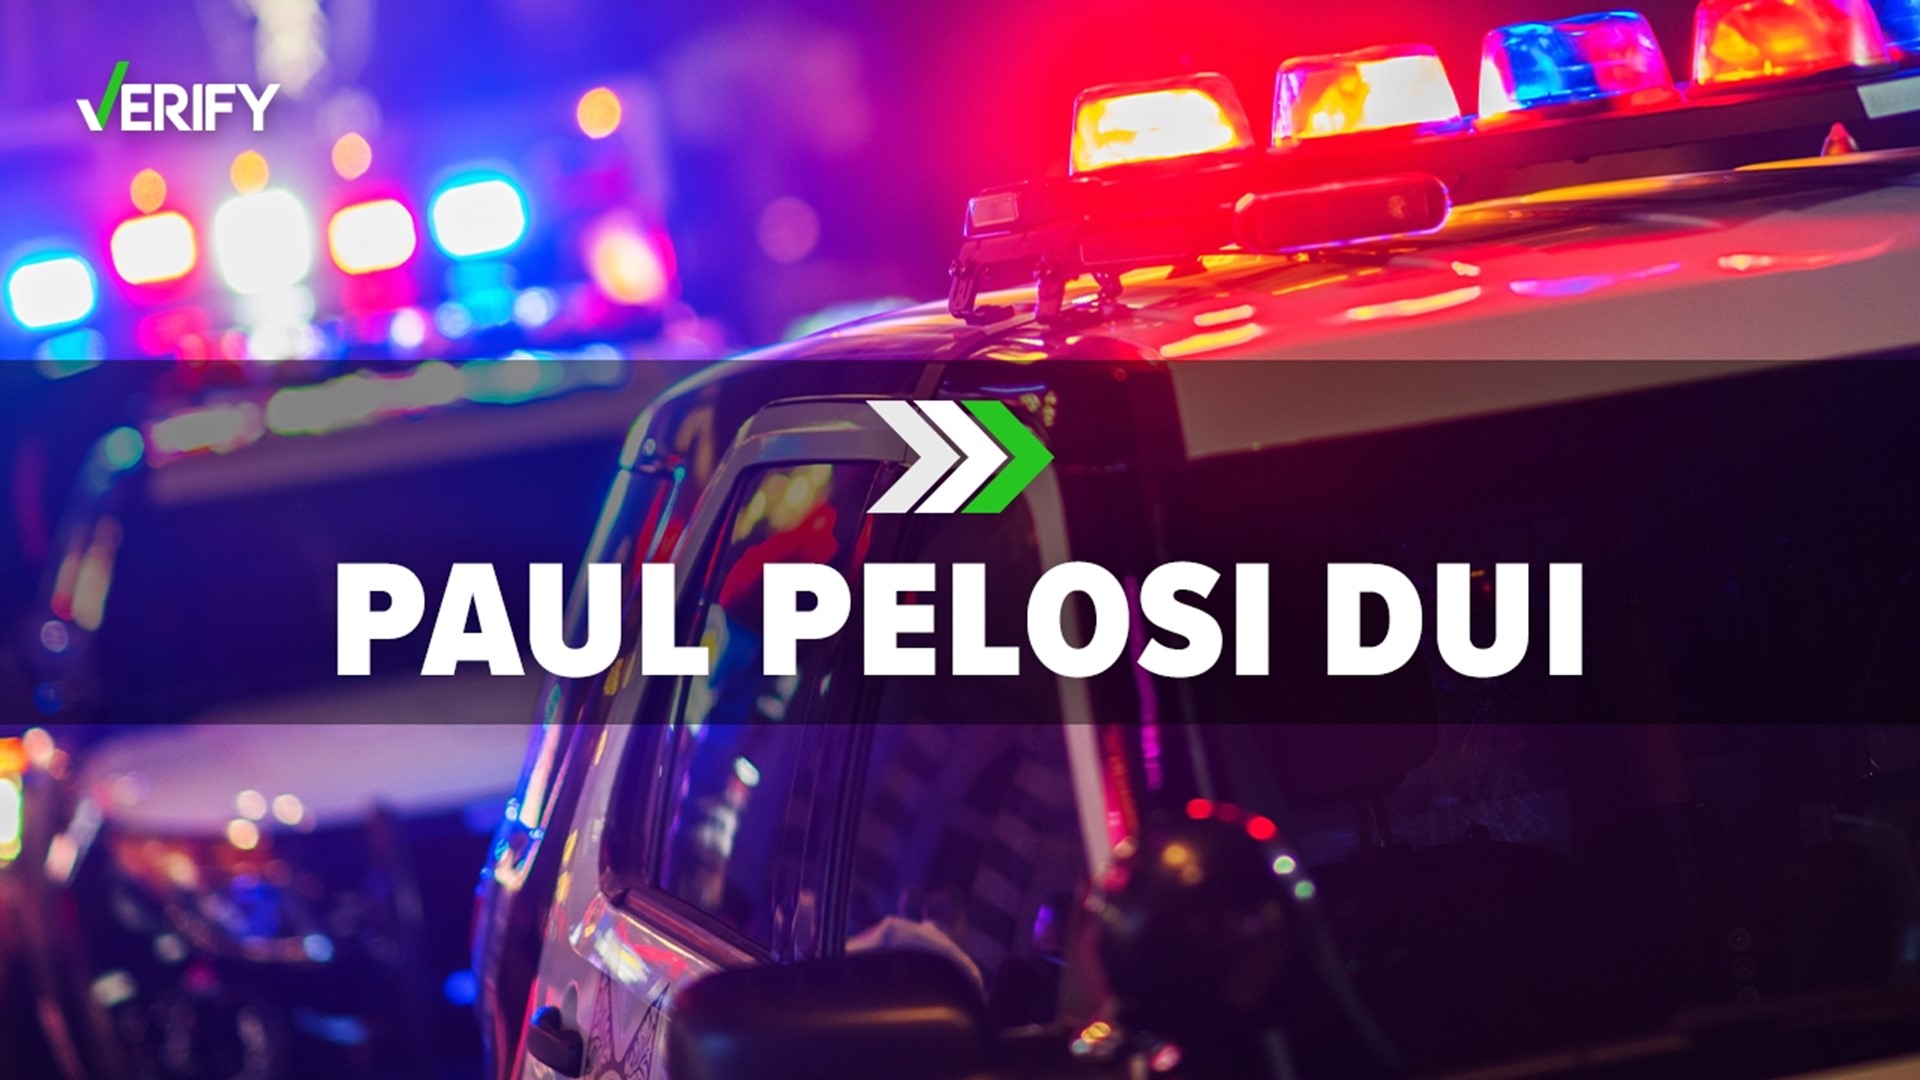 Paul Pelosi’s DUI charges have not been dropped. On June 23, he was formally charged with misdemeanor driving under the influence of alcohol causing injury.